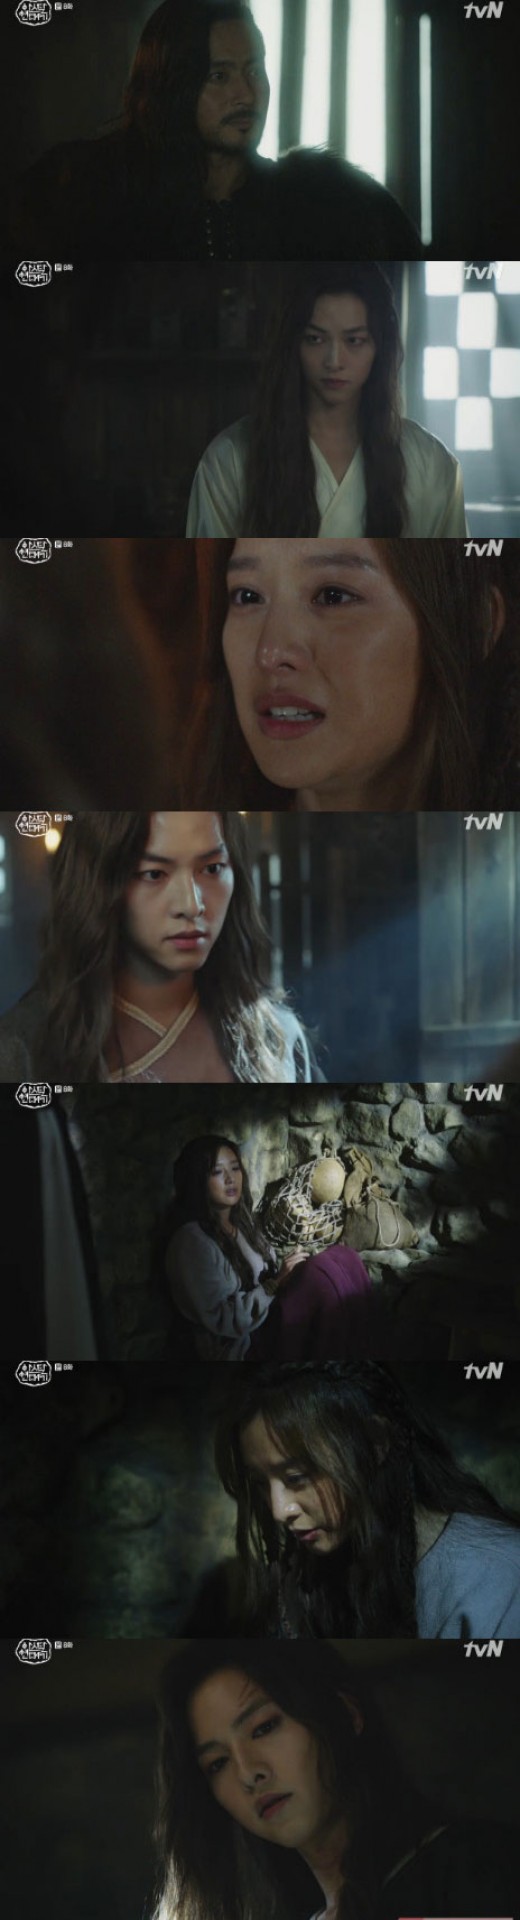 Kim Ji-won was shocked by the news of the death of Eun-seom and made a choice to hold Sayas hand.On the 23rd, TVNs Asdal Chronicle showed Tanya (Kim Ji-won) being shocked to hear of Eunsum (Song Joong-ki).The silver island was seriously injured while being chased by the Tagon unit, and Mubaek showed him secretly taking him away to treat the wound.He said Tanya would be fine and showed his willingness to find her.Tanya became the body of the twin Saya (Song Joong-ki) of the silver island growing up as the son of Tagon and ordered her to monitor Saya and report it to herself.Tanya, who had followed her, had seen him build the same house that the silver island had lived in, and had been in the same place, and he had been in the same place.Saya said she saw such a house in her dream and revealed her interest in Tanya, saying she saw the same.Tanya, who met her father with the care of Saya, was told by him that the silver island was dead.Tagon executed a fake silver island without finding a real silver island, and people knew that the killer of Sanwoong was dead.Tanya hummed rather than hummed when she heard the news, and Saya went to her and said, What are you honoring?When I died, I smiled and waited for Taealha to die in front of him, he said. What are you waiting for?But Tanya said, I do not know what you mean, and Saya asked if her attitude was strange even in the death of her companion.Tanya laughed, Whos dying? Silver Island? No. Im coming to save me, the silver island. I told you to come. So Saya said, I saw it. The whole federation saw it.His tongue was drawn out and screamed, boiled alive in boiling water, Tanya shouted, beating him and denying it.Tanya cried out, I am dead because of me, and I am bound by a spell to fly away. She watched her and was saddened.Saya asked why her clan was being trials, and Saya stimulated her, saying, If you have strength and you do not get to a hungry place, you will not know.Tanya said, I will live, I will go to that place.On the other hand, Eunseom was destined to be sold as a slave while trying to save his Friends, and wondered if the reunion of the two would be concluded.